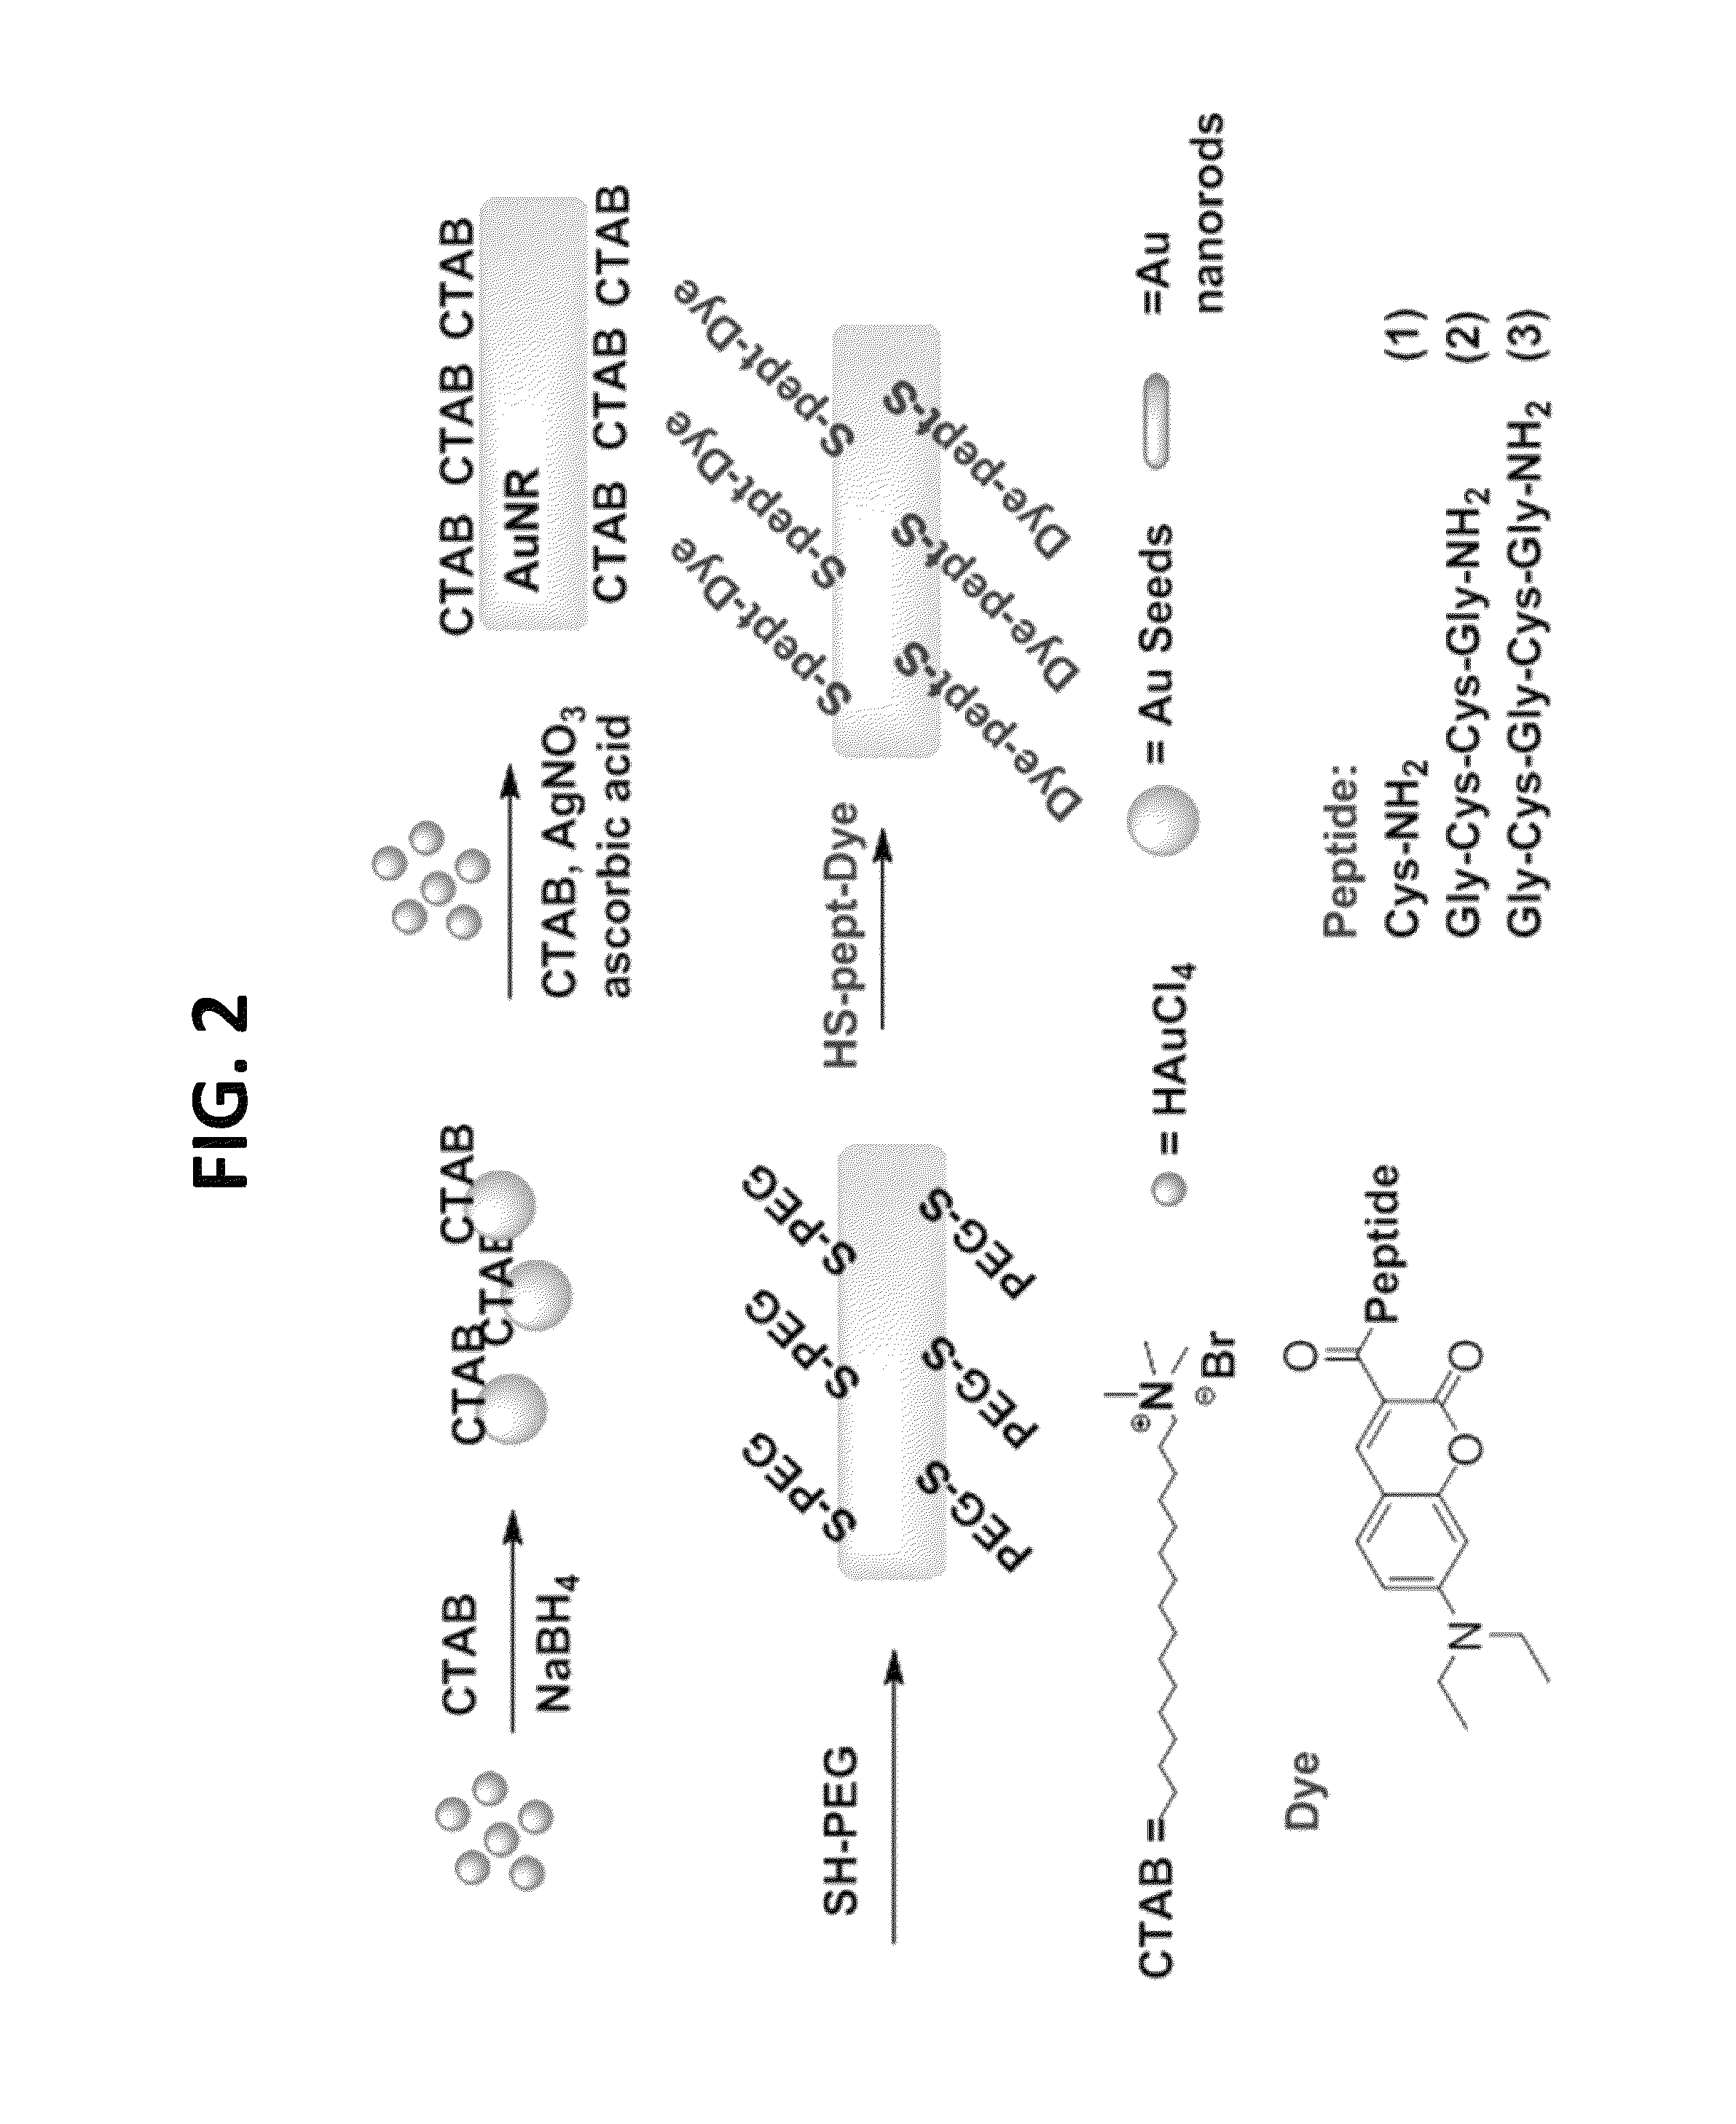 Nanothermometer, methods and uses therefor